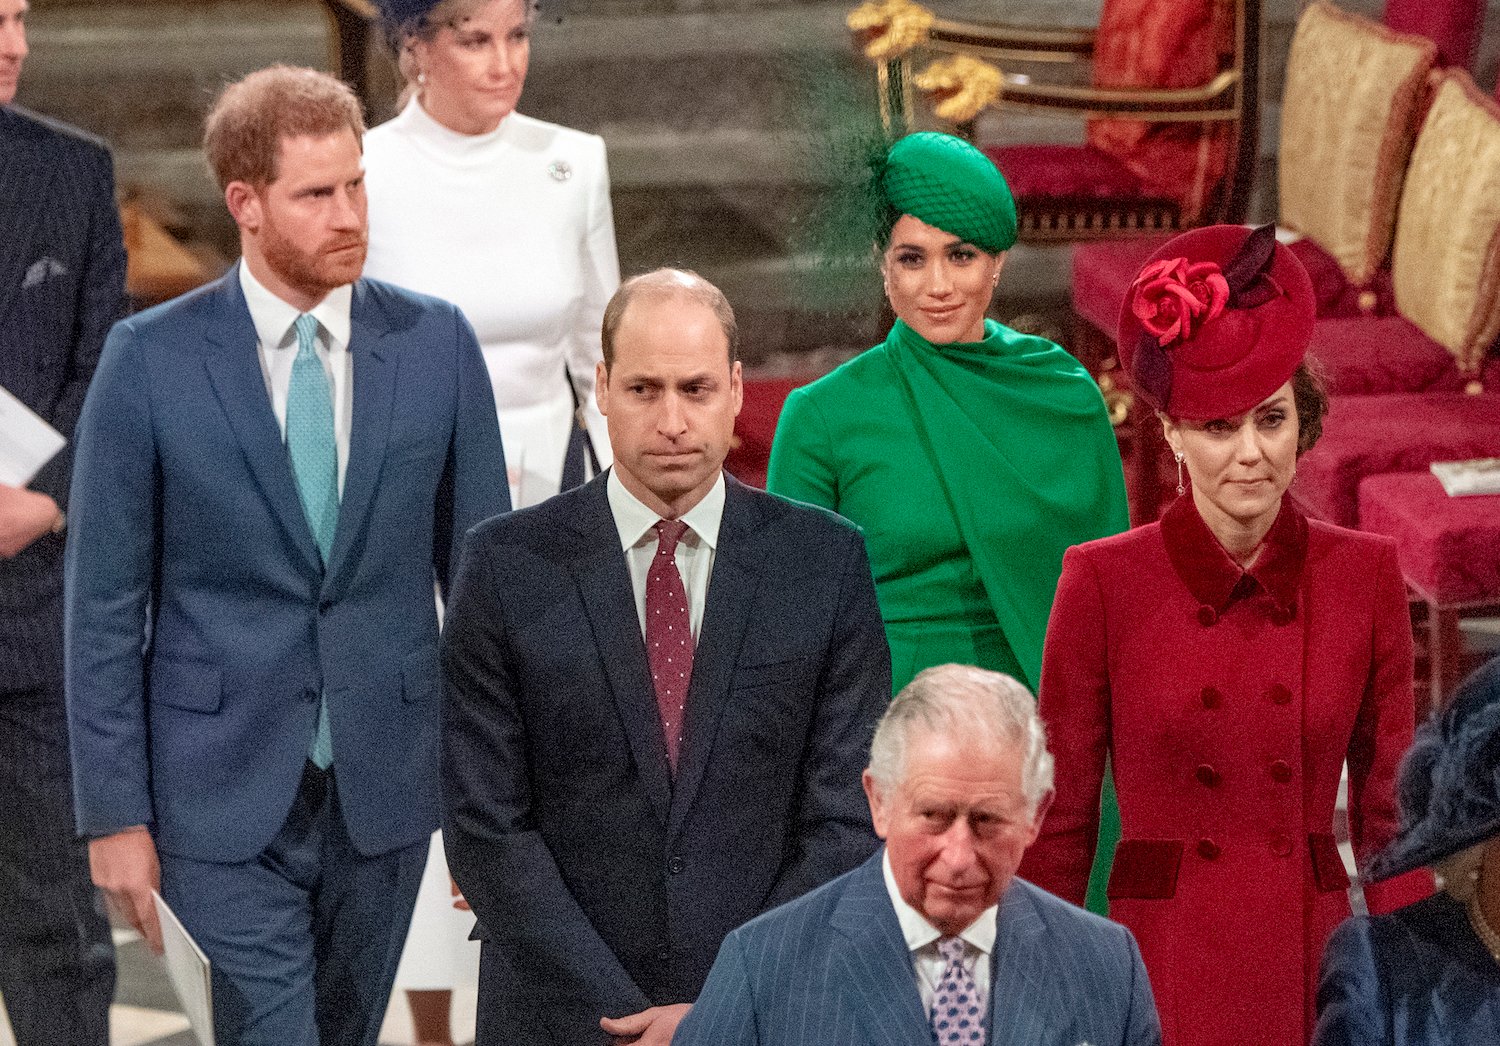 Prince Harry, Meghan Markle, Prince William, and Kate Middleton attend the Commonwealth Day Service 2020